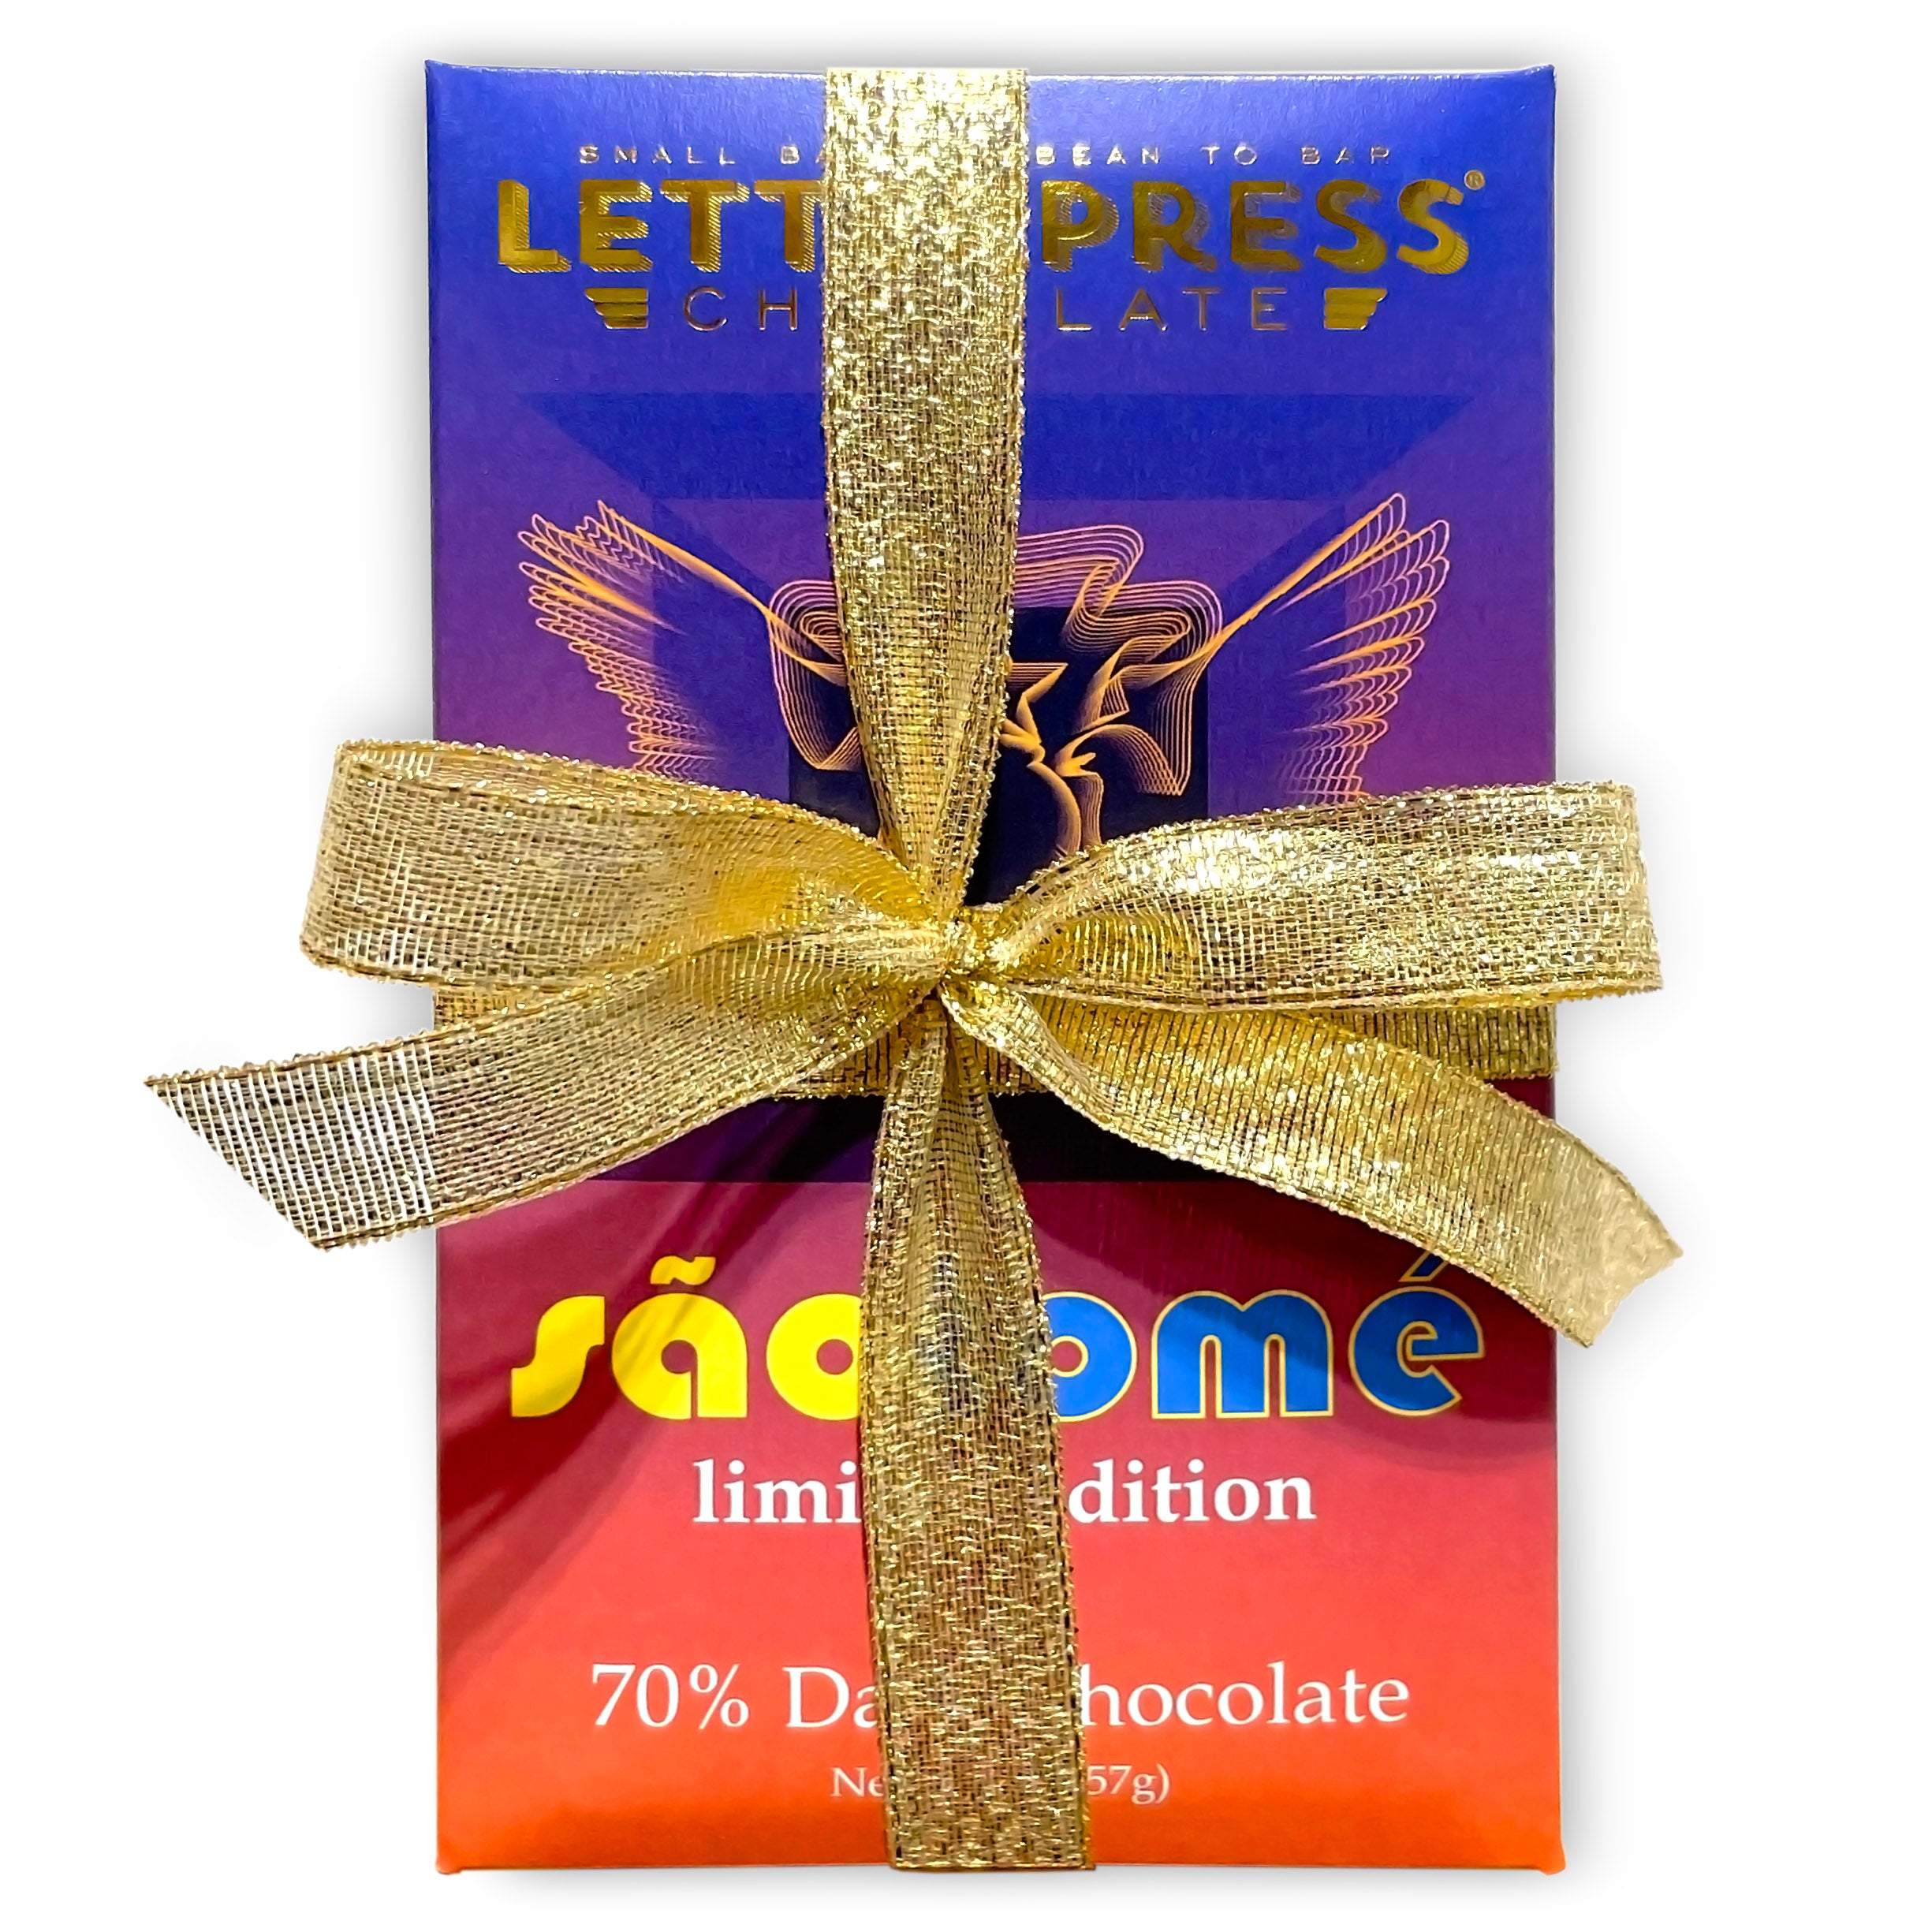 Ultimate Dark chocolate bars wrapped in gold ribbon - see description for details